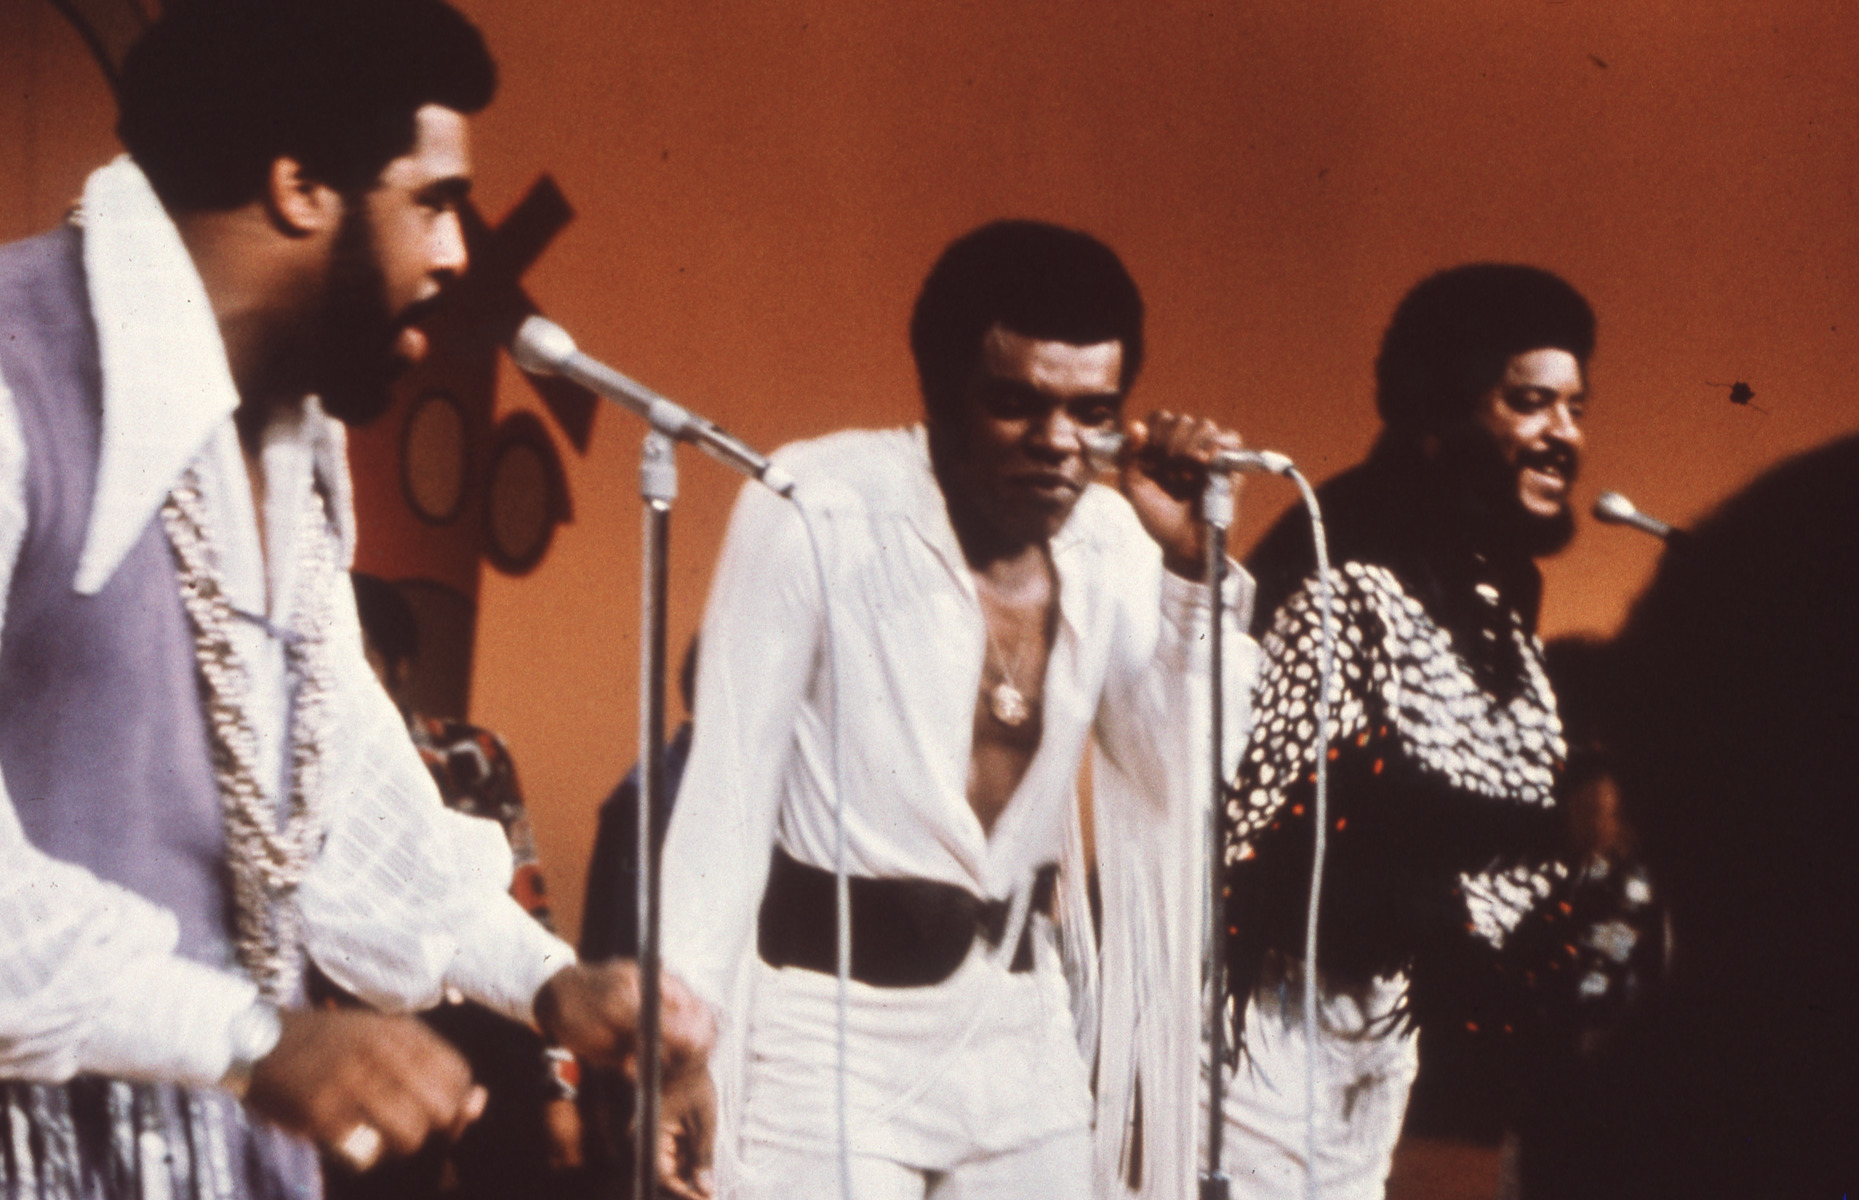 Beyoncé Joins The Isley Brothers for 'Make Me Say It Again' Update